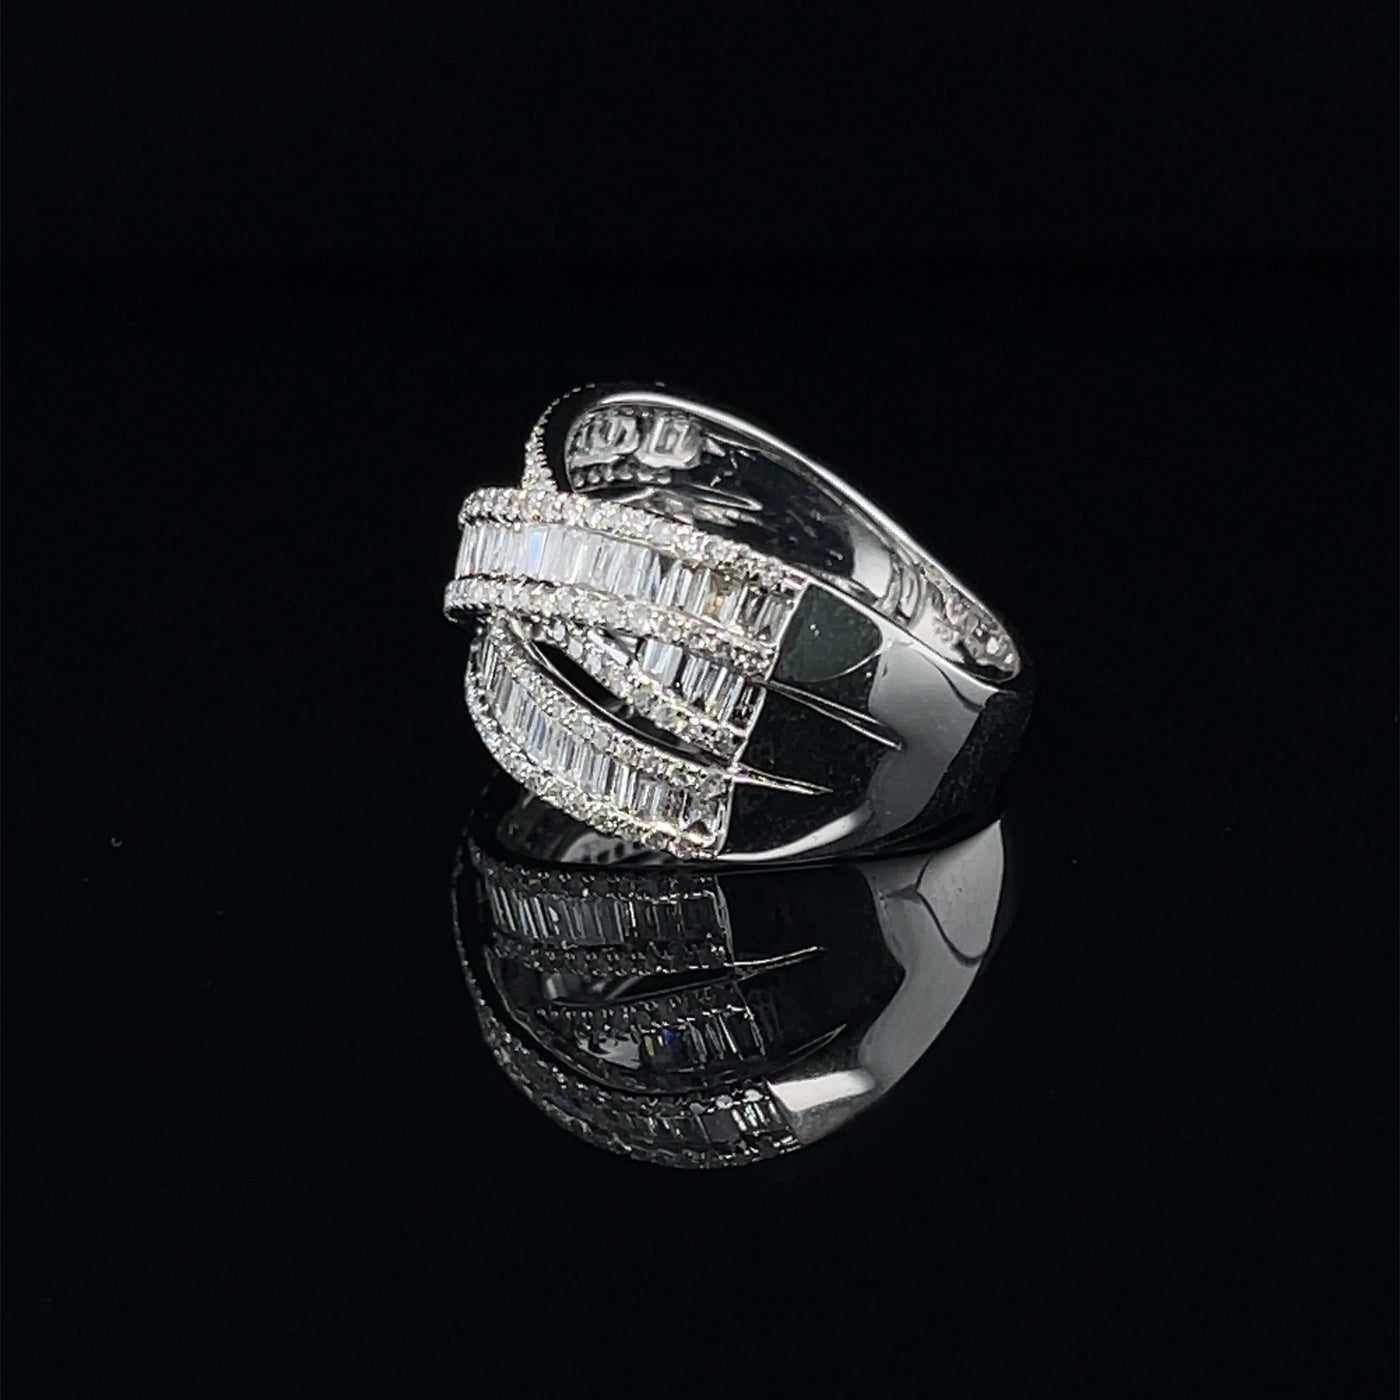 'Hope' 18CT white gold trilogy stack ring